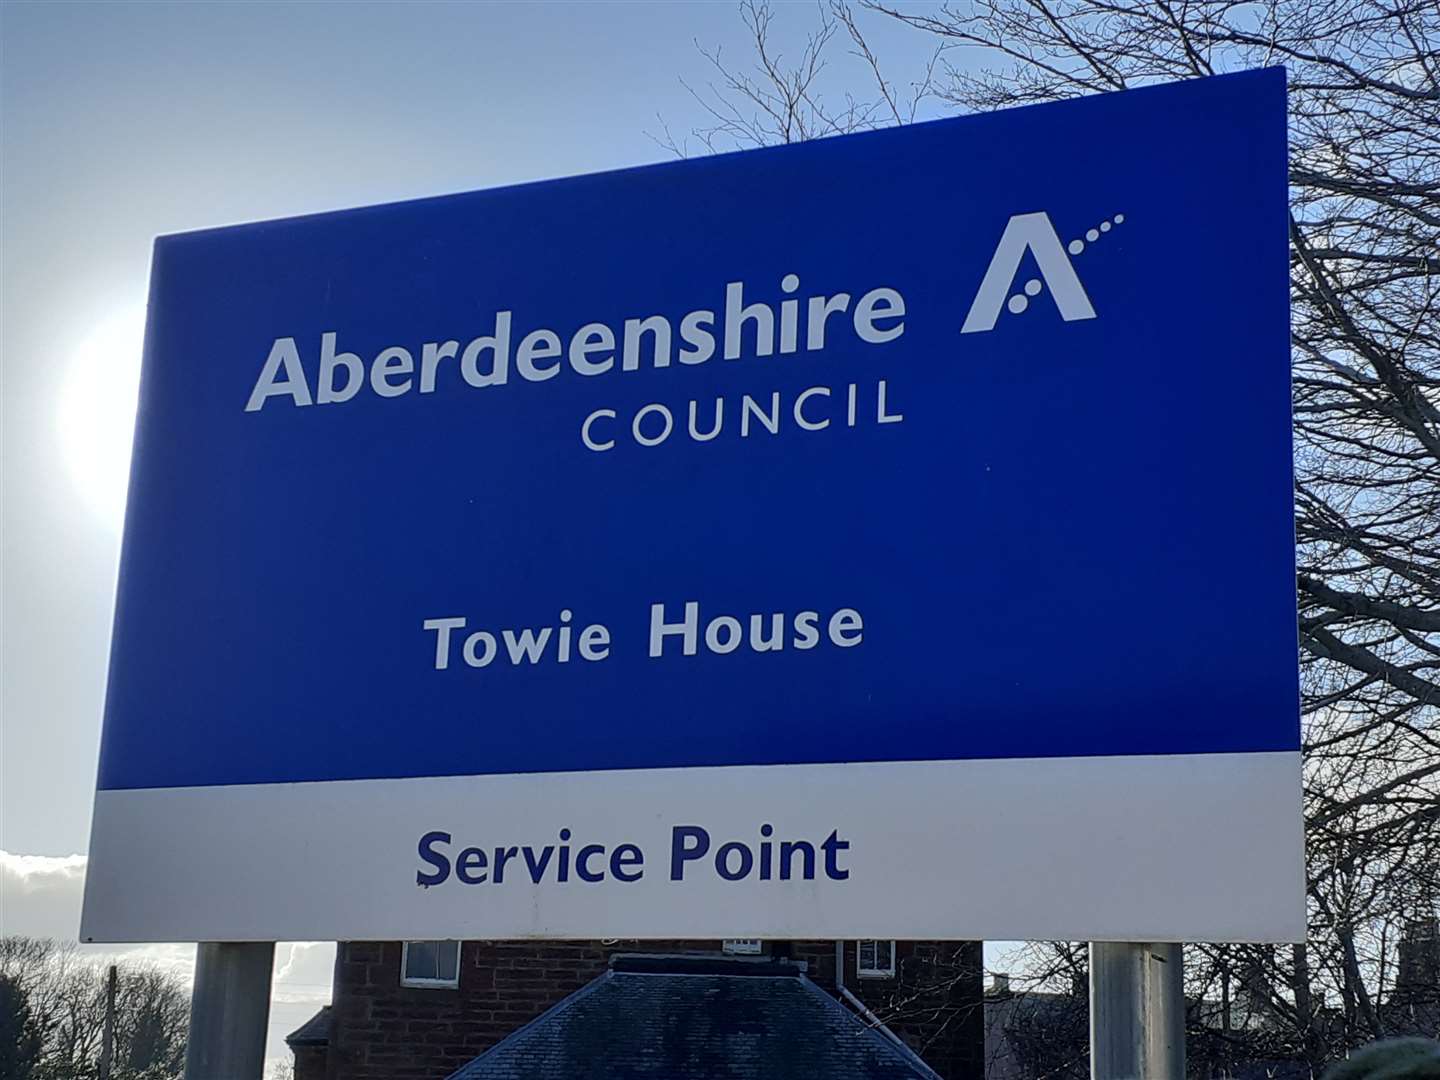 Aberdeenshire Council is set to close several north-east service points on April 5 including Towie House in Turriff